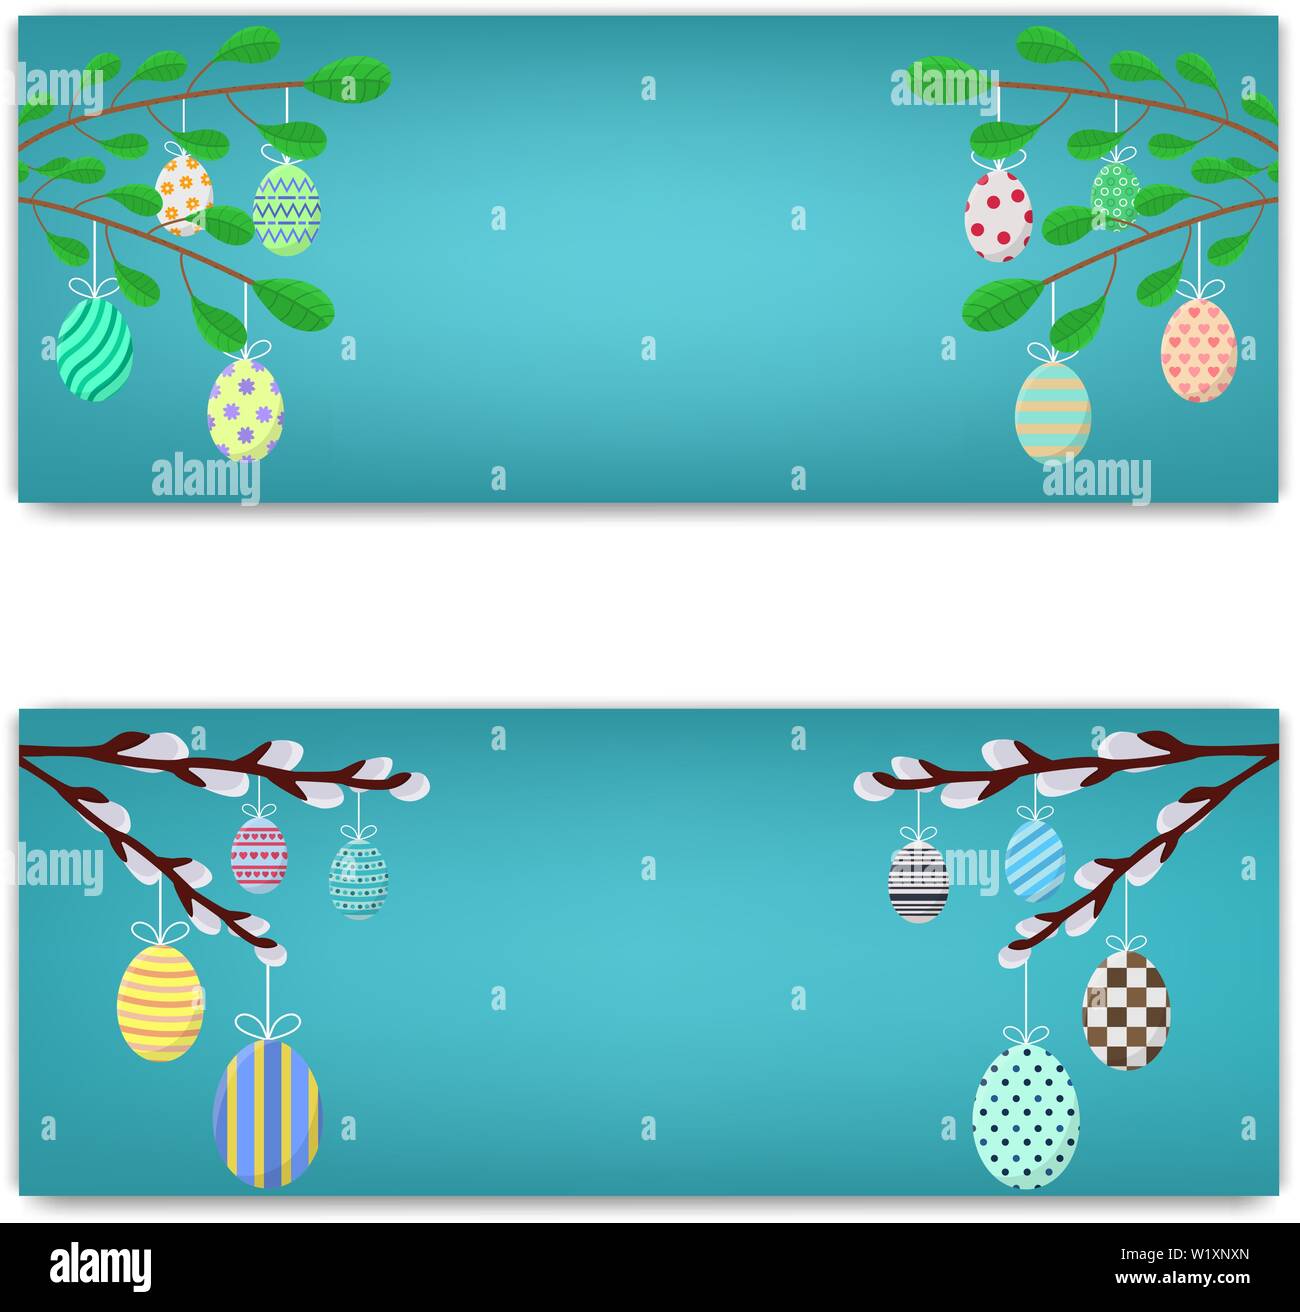 Template of Easter Discount, Brochure, Postcard, Flyer with Space for Text. Greeting or Invitation with Green Branches and Willow Twigs. Hanging Eggs. Stock Vector